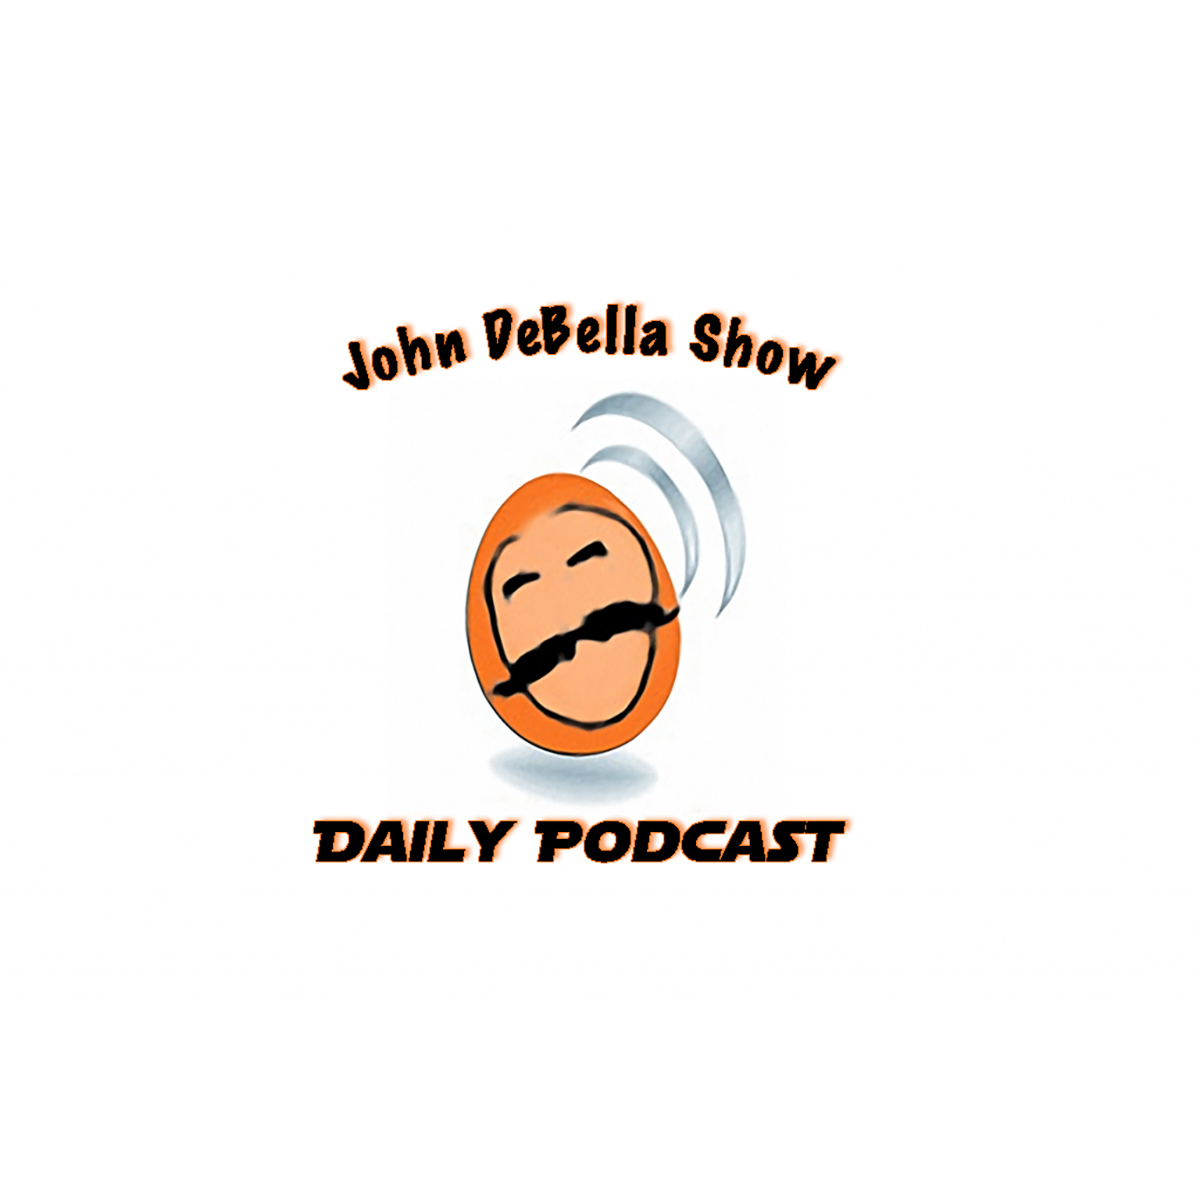 The John DeBella Show 41 & Done! DeBella Set Up on a Date by John Oates